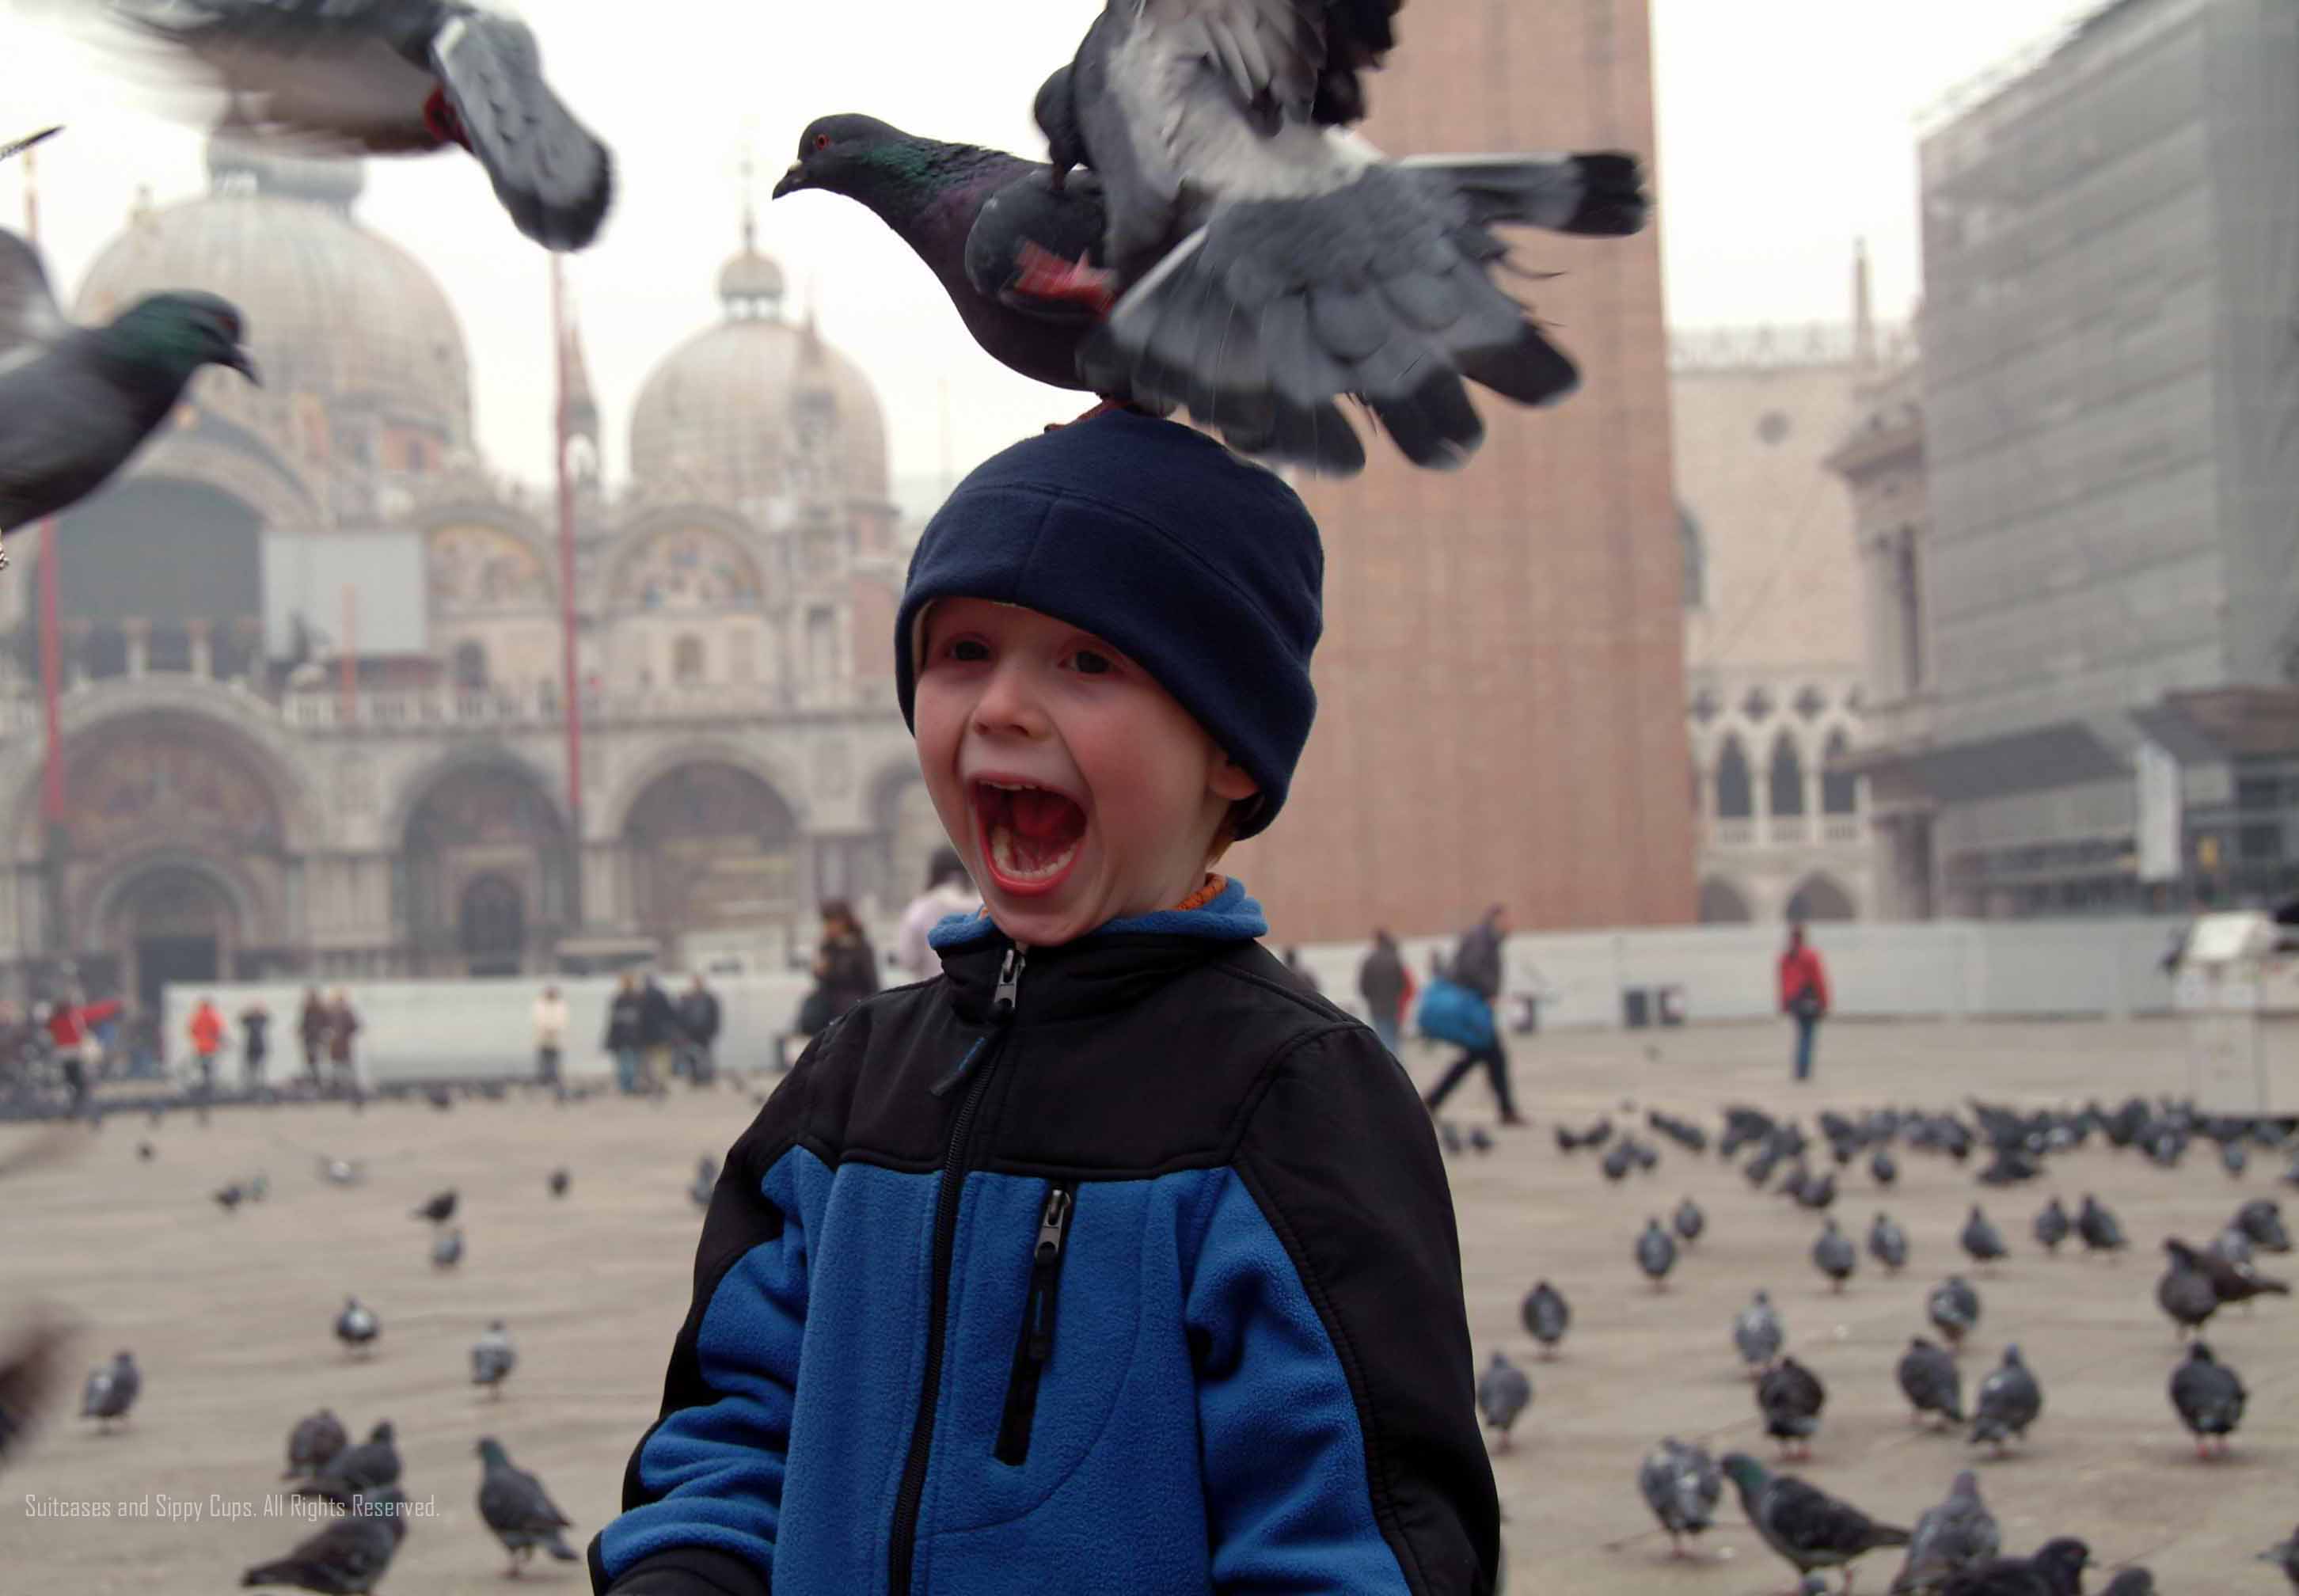 The Pigeons of Venice